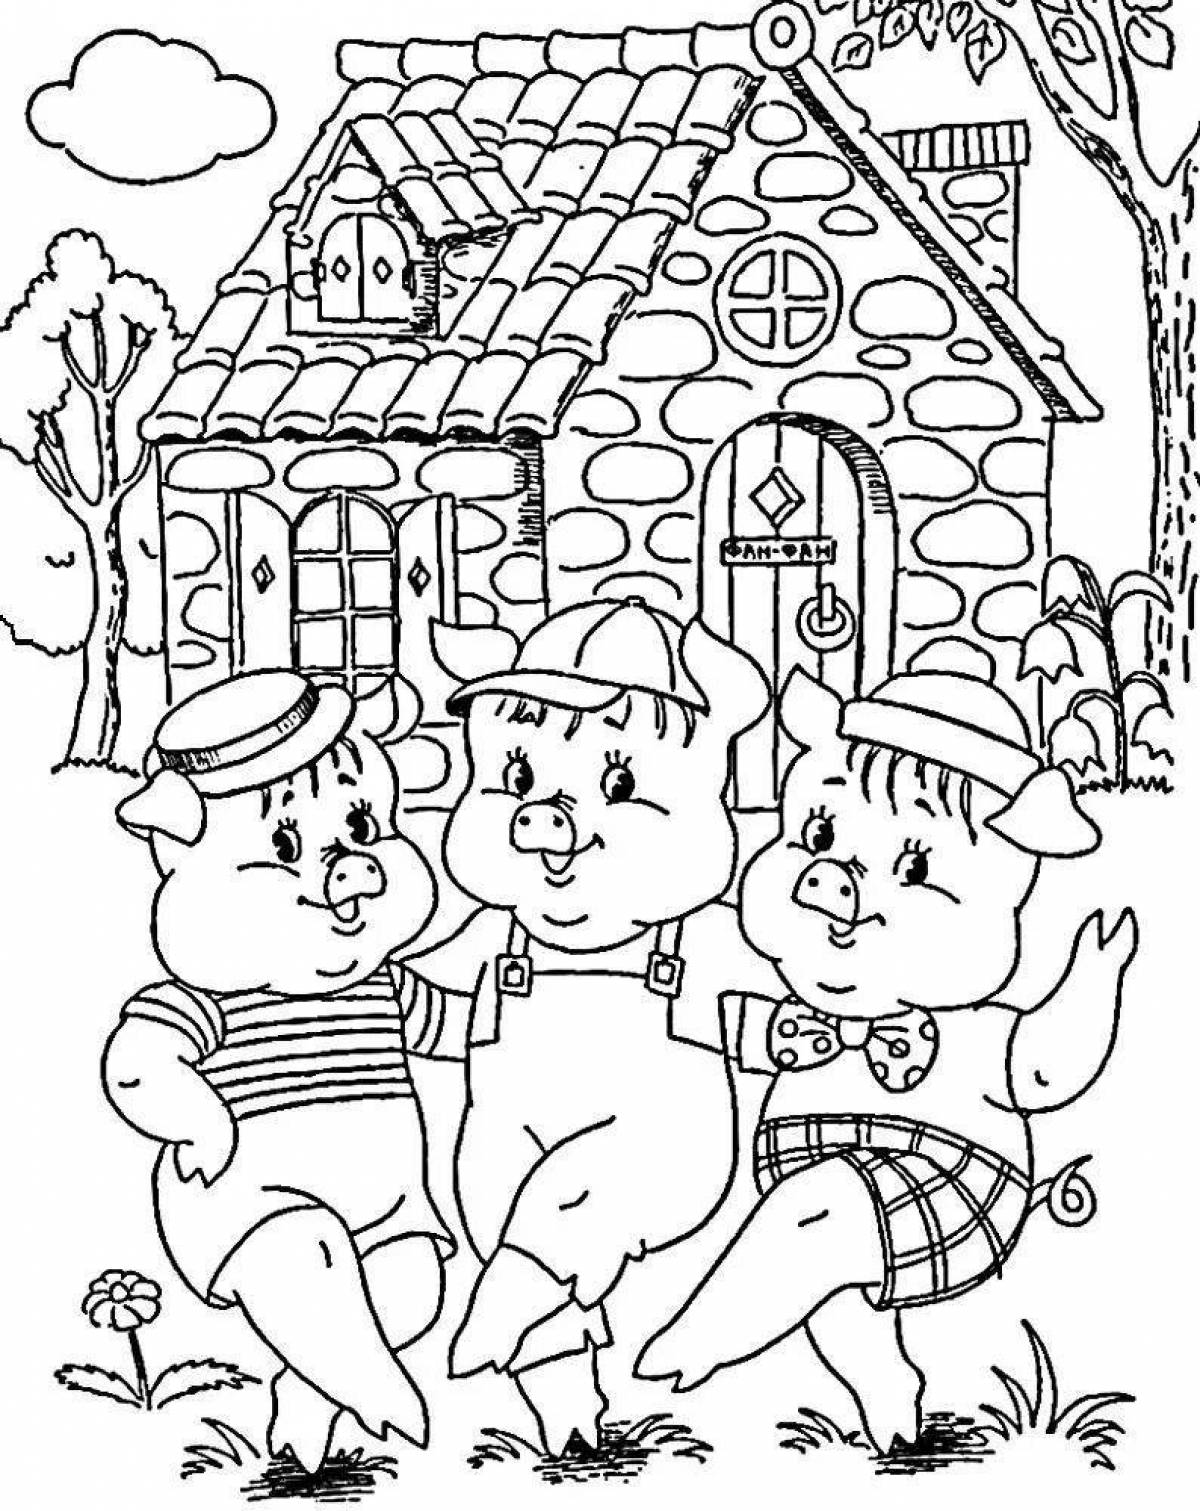 Amazing coloring pages heroes of fairy tales